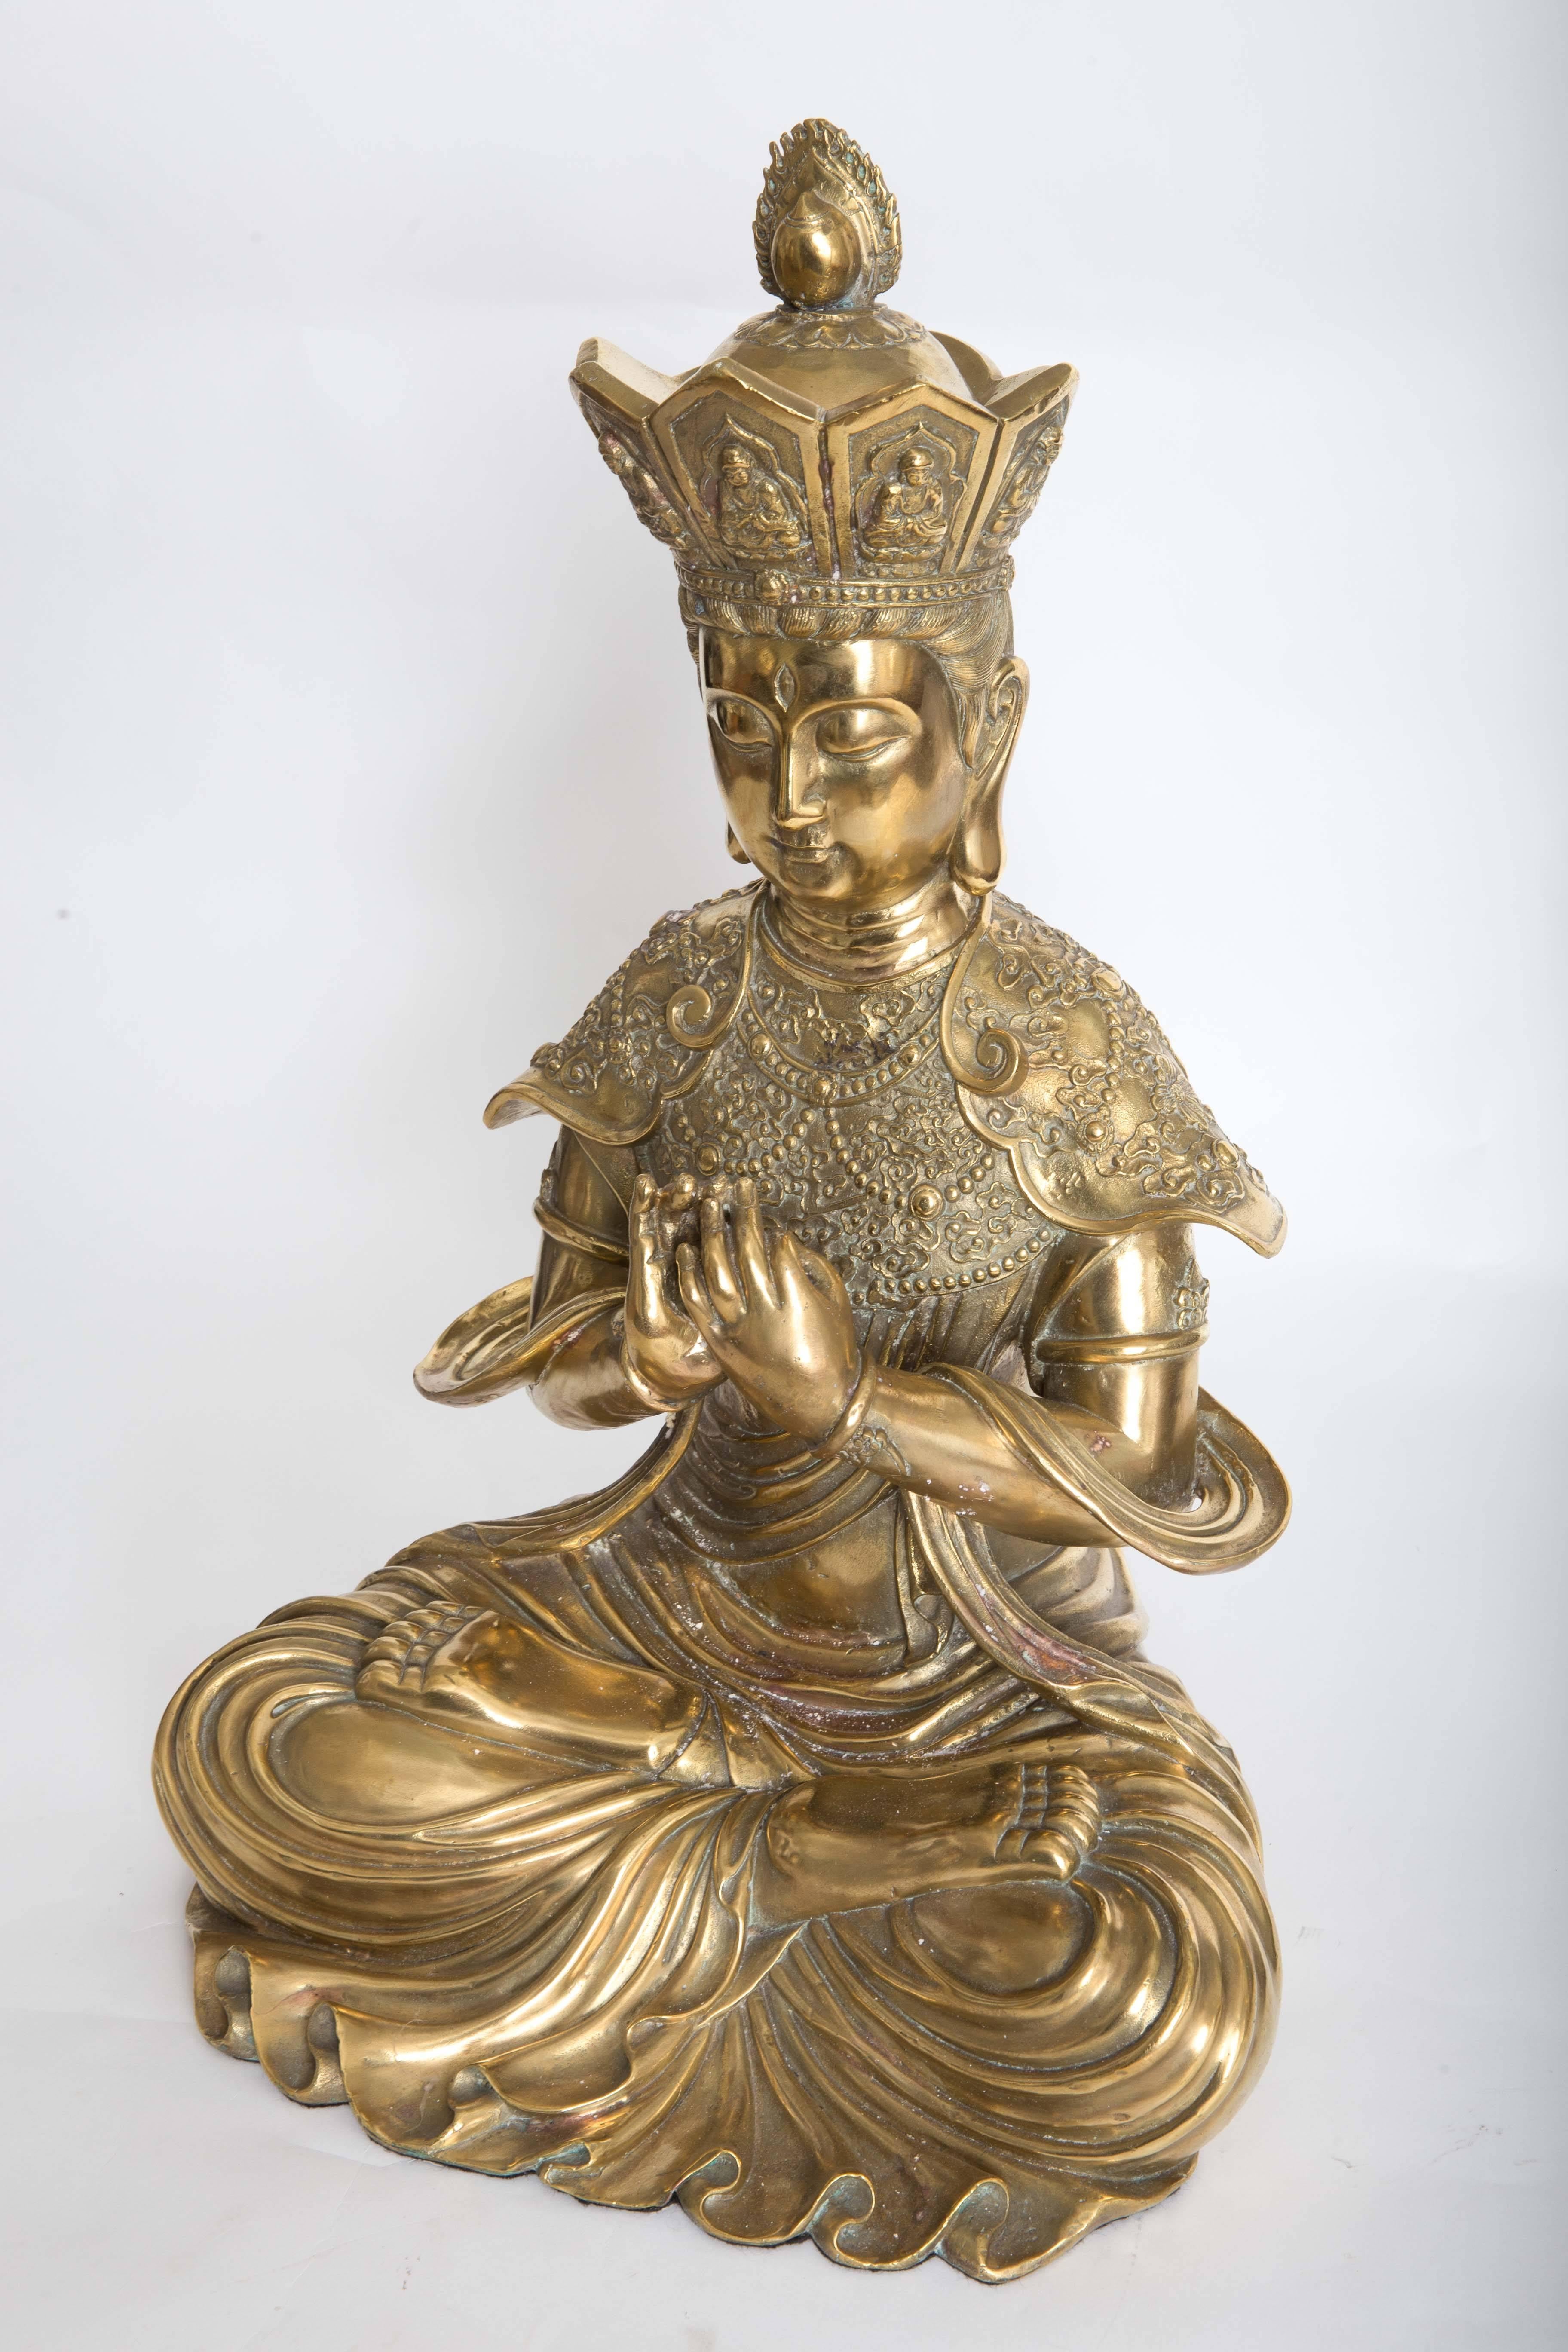 Intricately etched bronze sculpture of seated Diety figure.